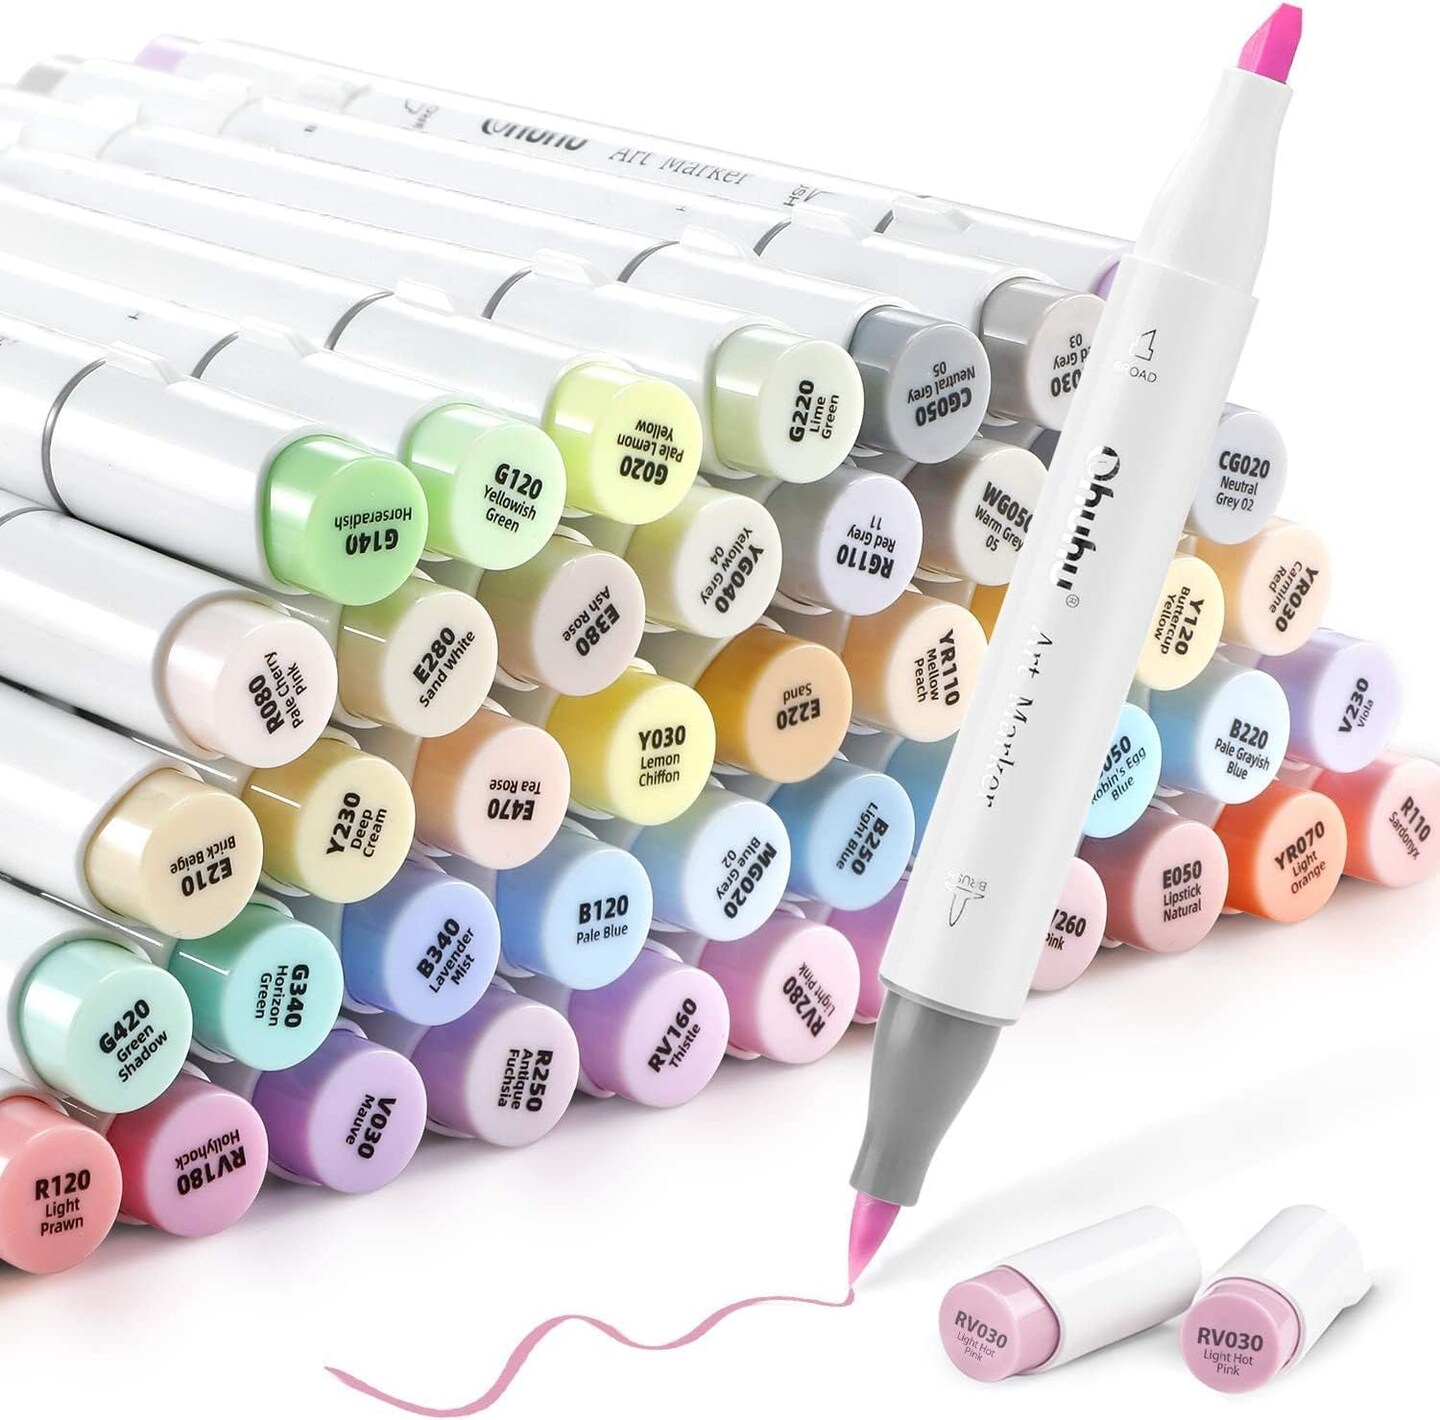 Watercolor Markers For Adult Coloring, 12 Pastel Colors